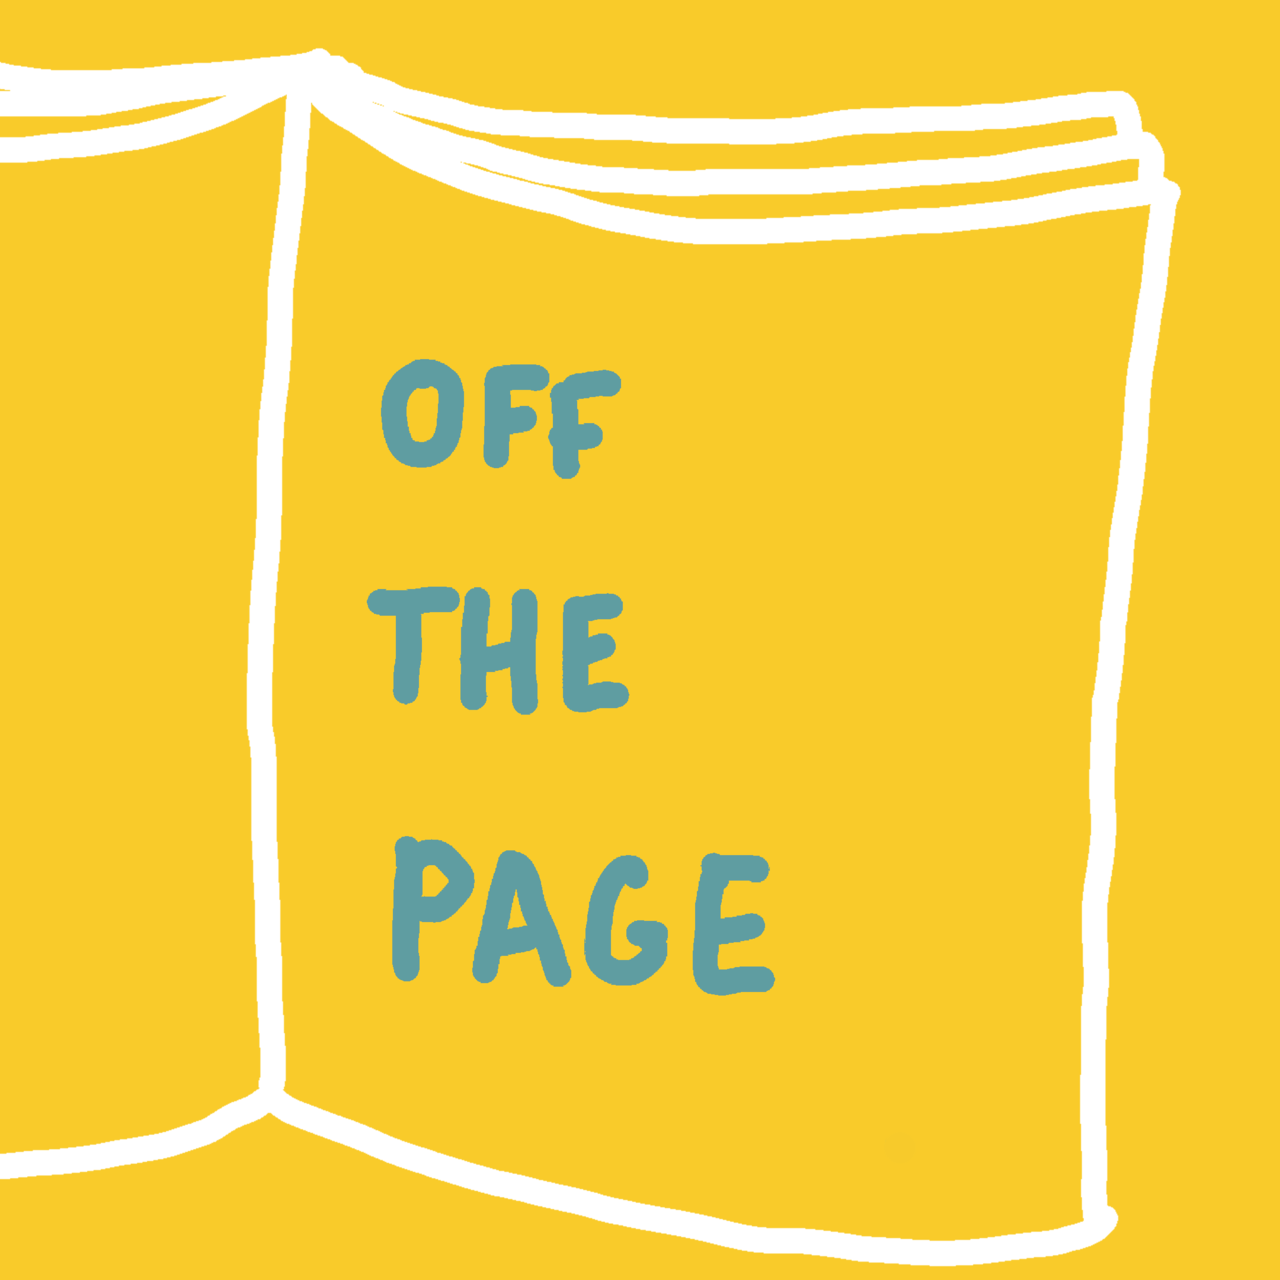 Artwork for Off the Page by Libby Page